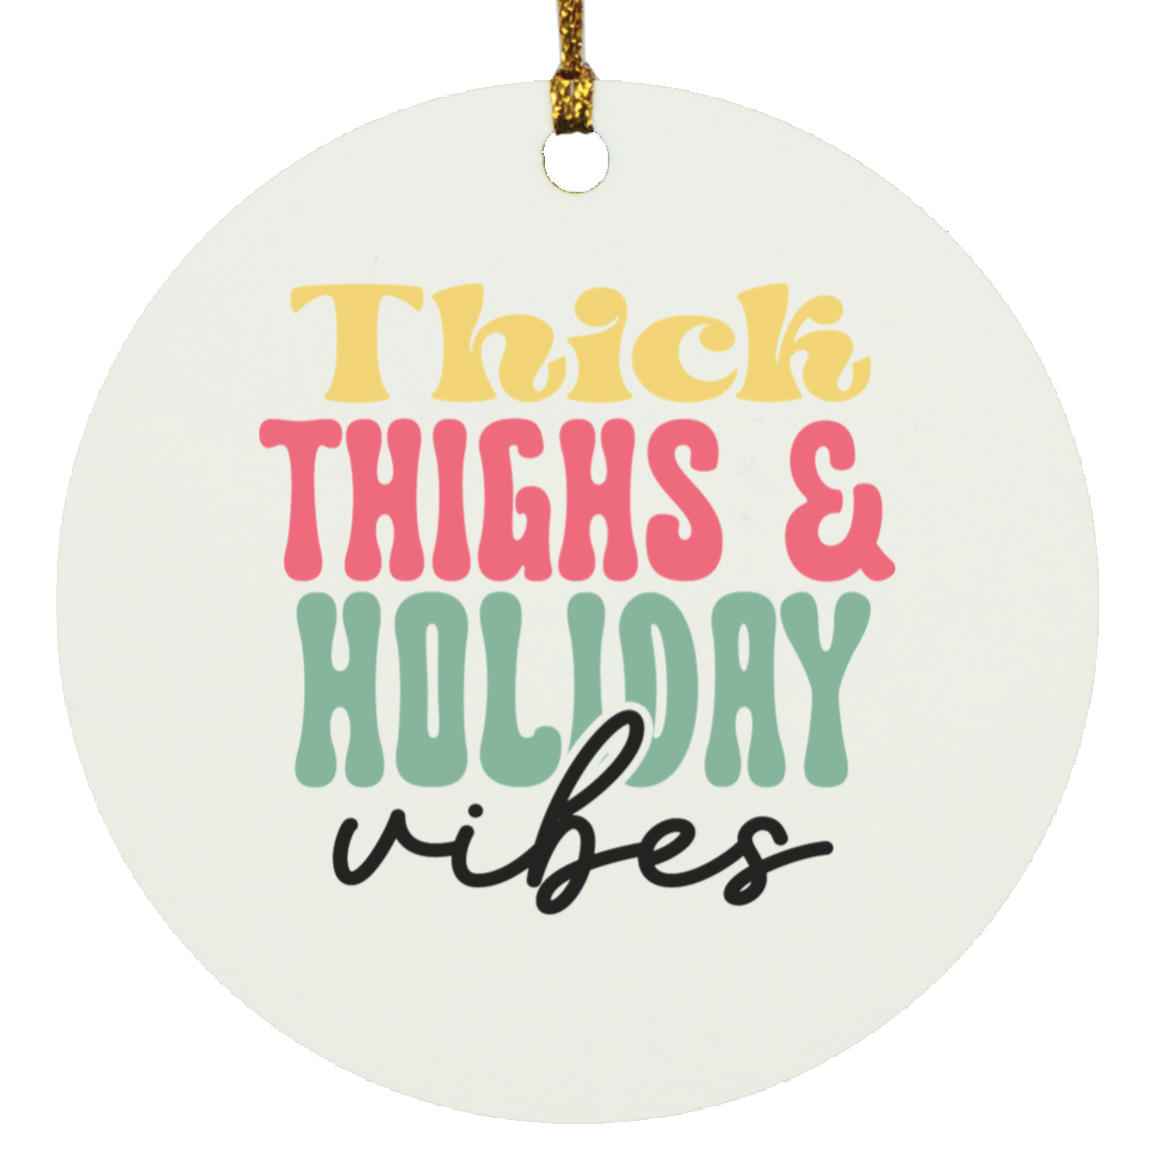 Thick Thighs Circle Ornament